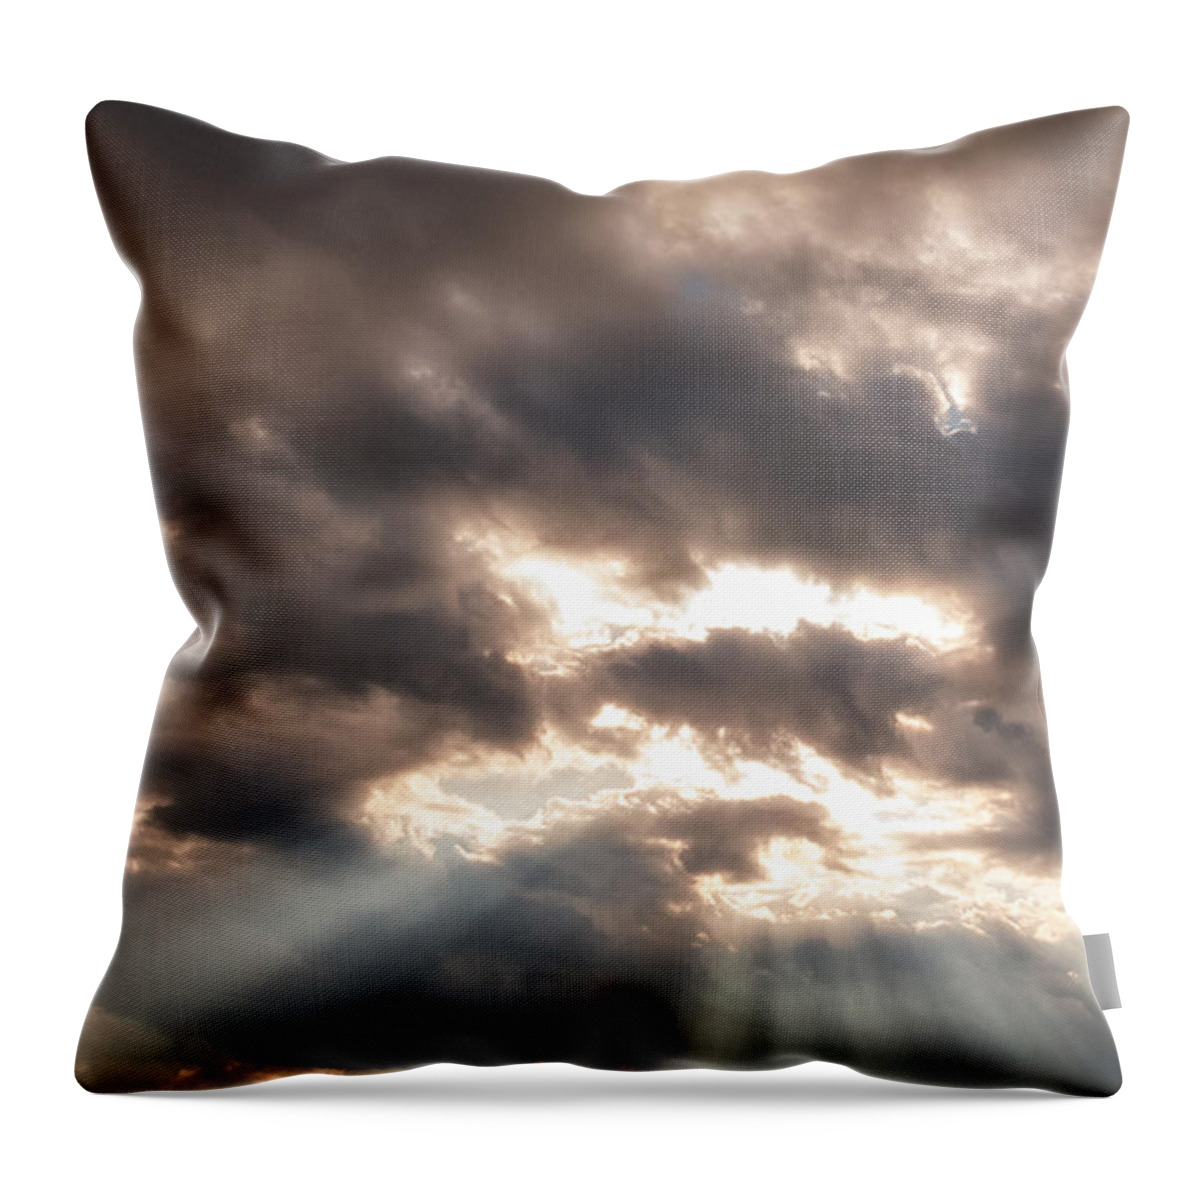 Calm Throw Pillow featuring the photograph Storm Rays by Lars Lentz